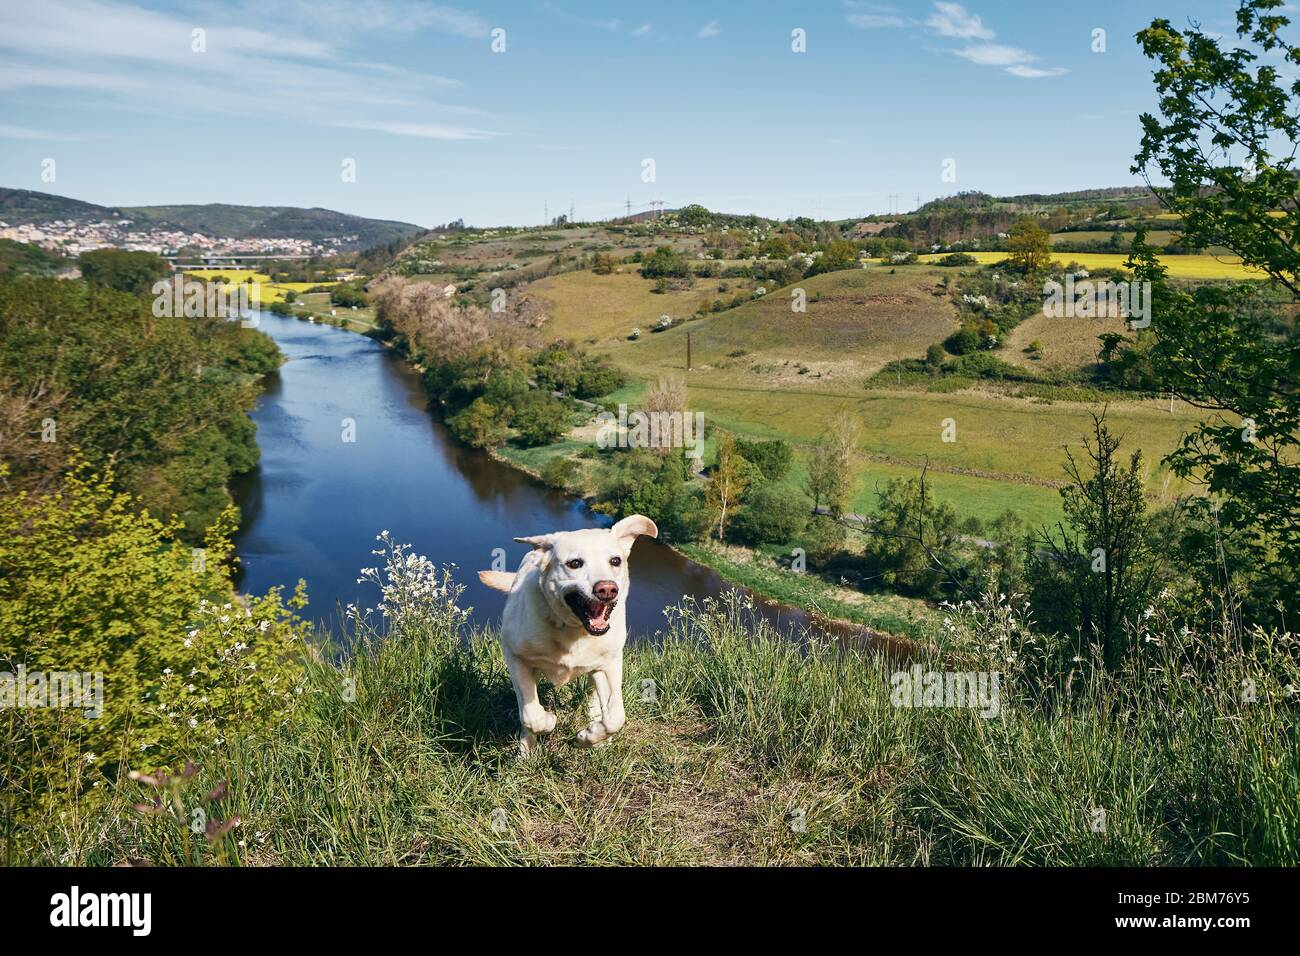 Happy dog running on meadow against landscape with river valley. Stock Photo